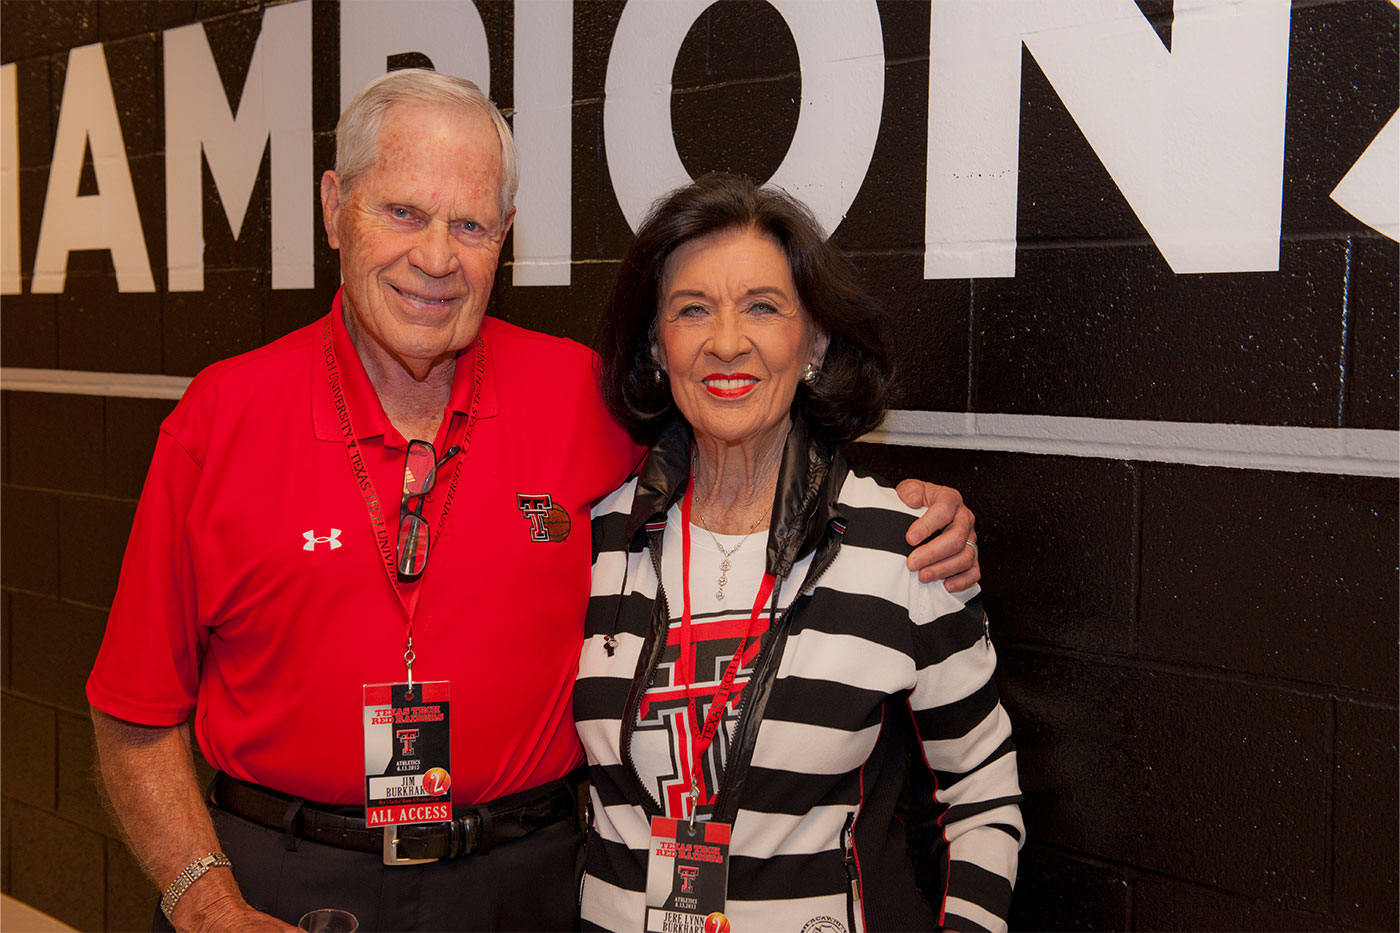 The Burkharts are also avid fans and supporters of Texas Tech Athletics.